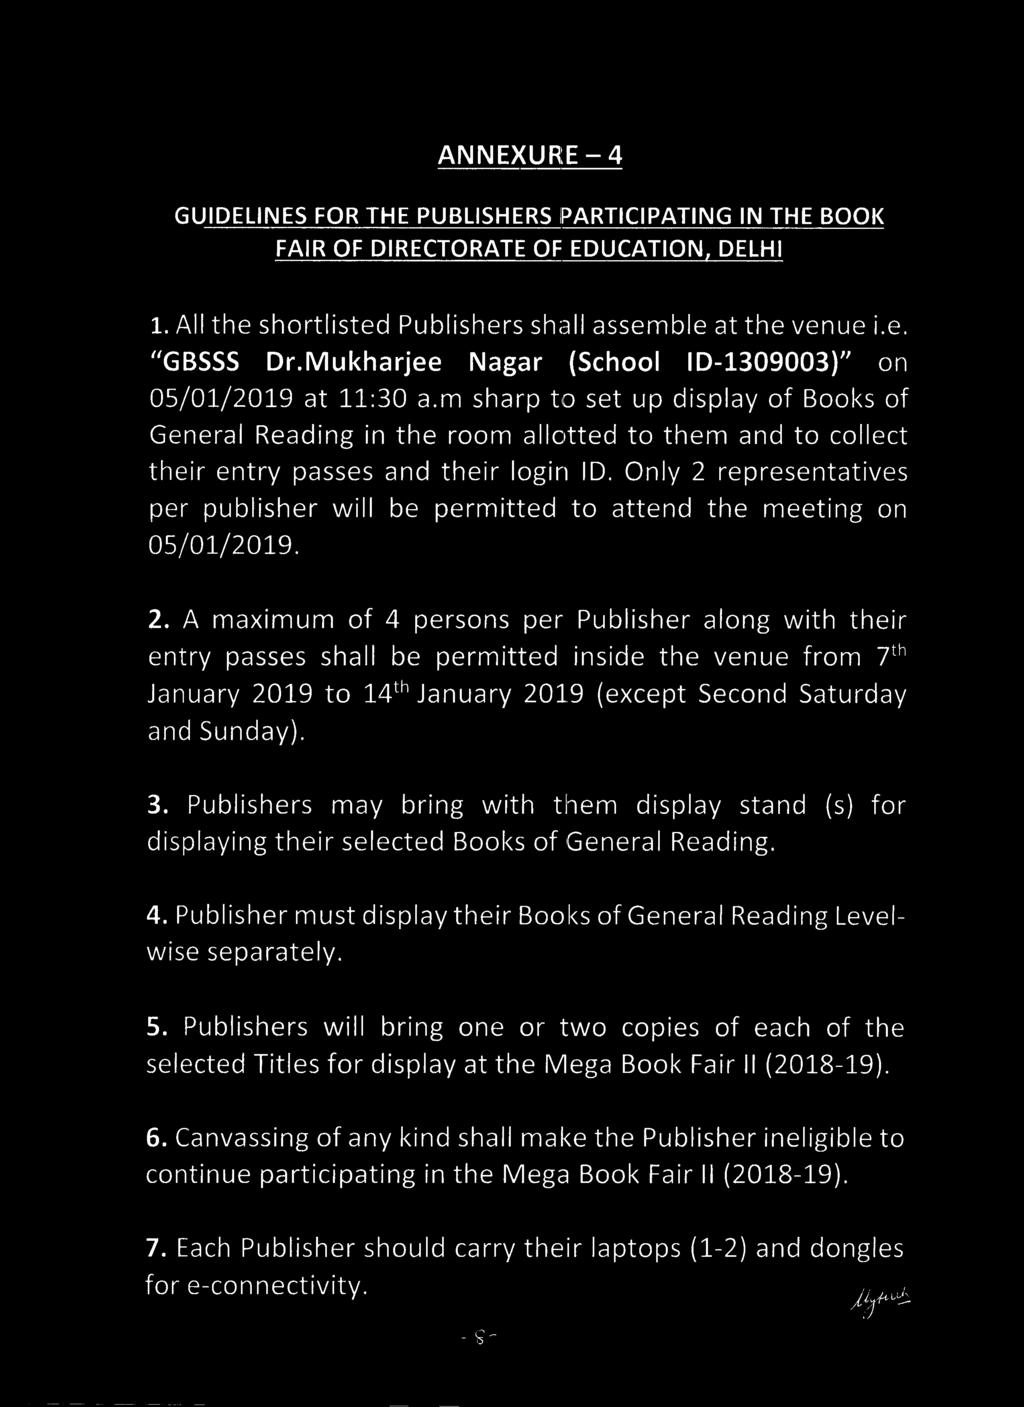 Only 2 representatives per publisher will be permitted to attend the meeting on 05/01/2019. 2. A maximum of 4 persons per Publisher along with their entry passes shall be permitted inside the venue from 7t h January 2019 to 14t h January 2019 (except Second Saturday and Sunday).